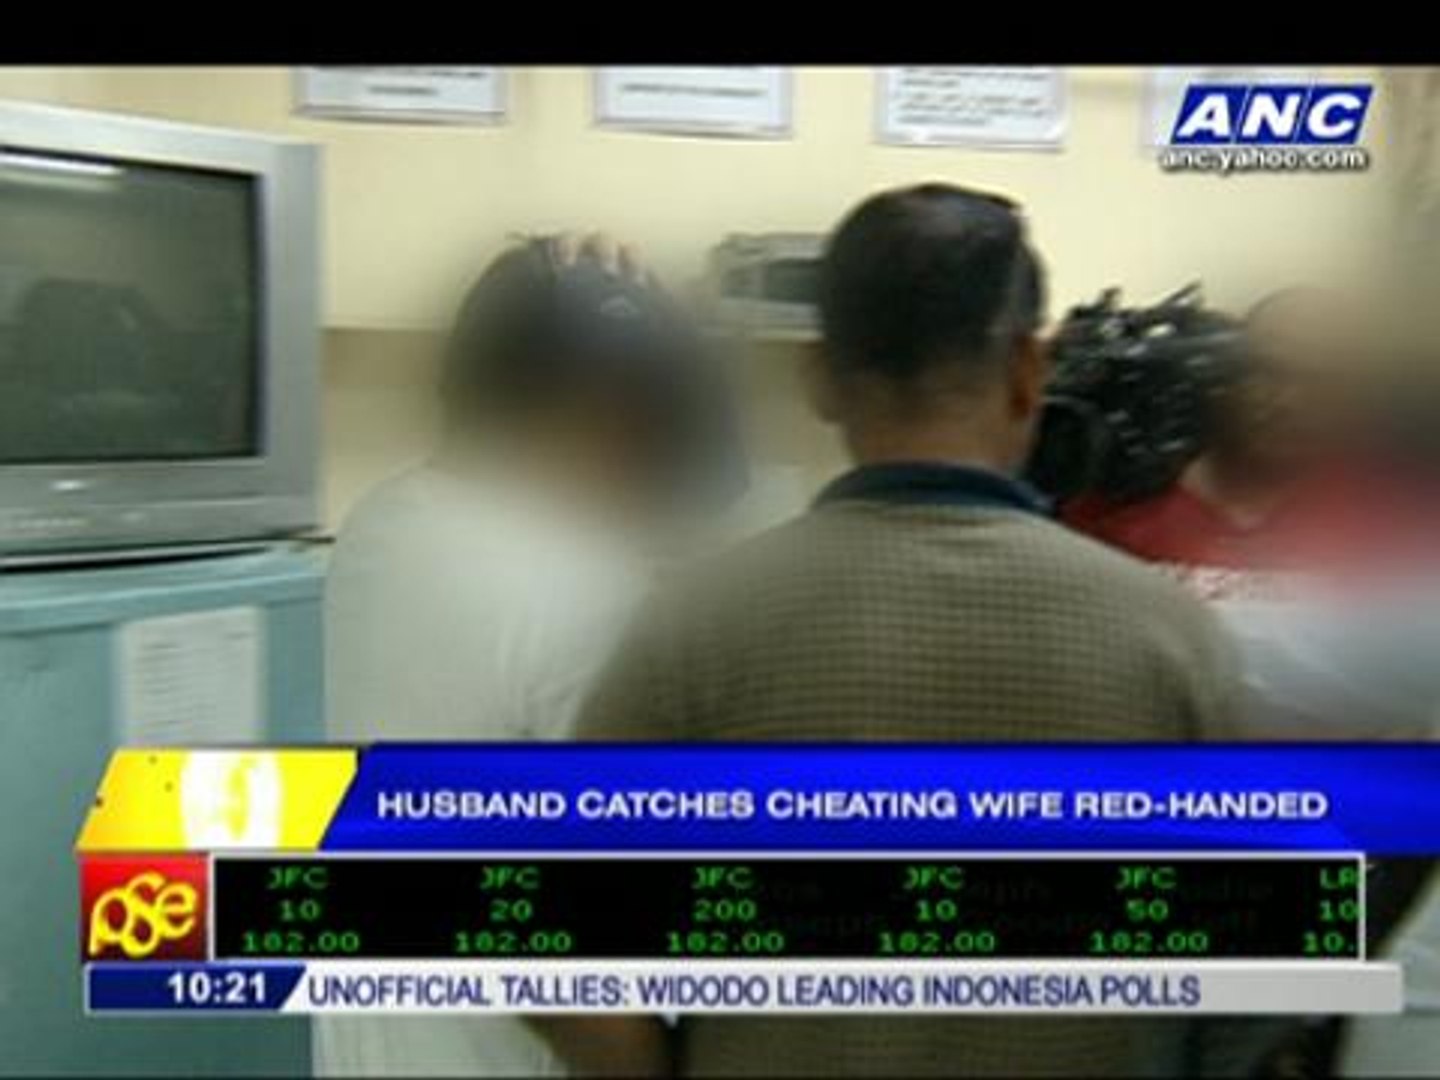 hubby catches wife cheating